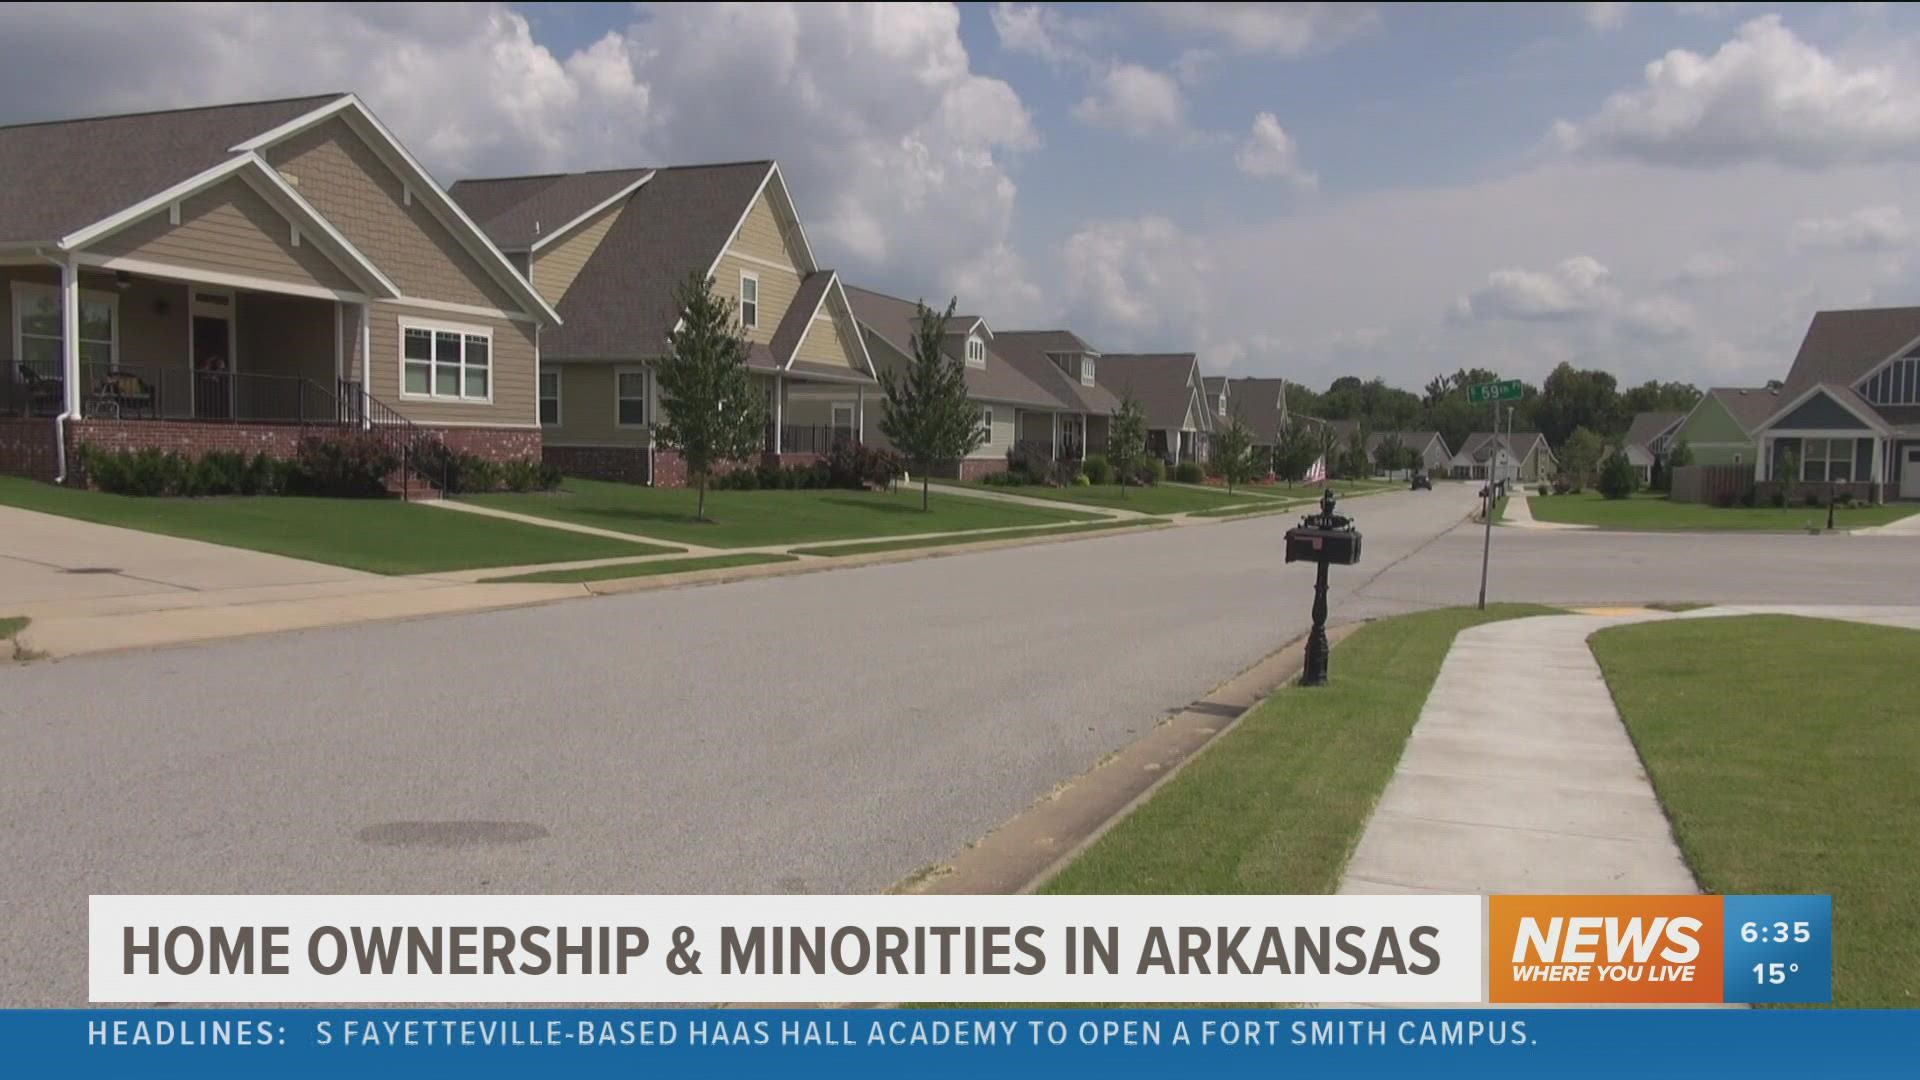 For a large portion of the country, minorities, in particular, homeownership is still more of a dream than a reality.